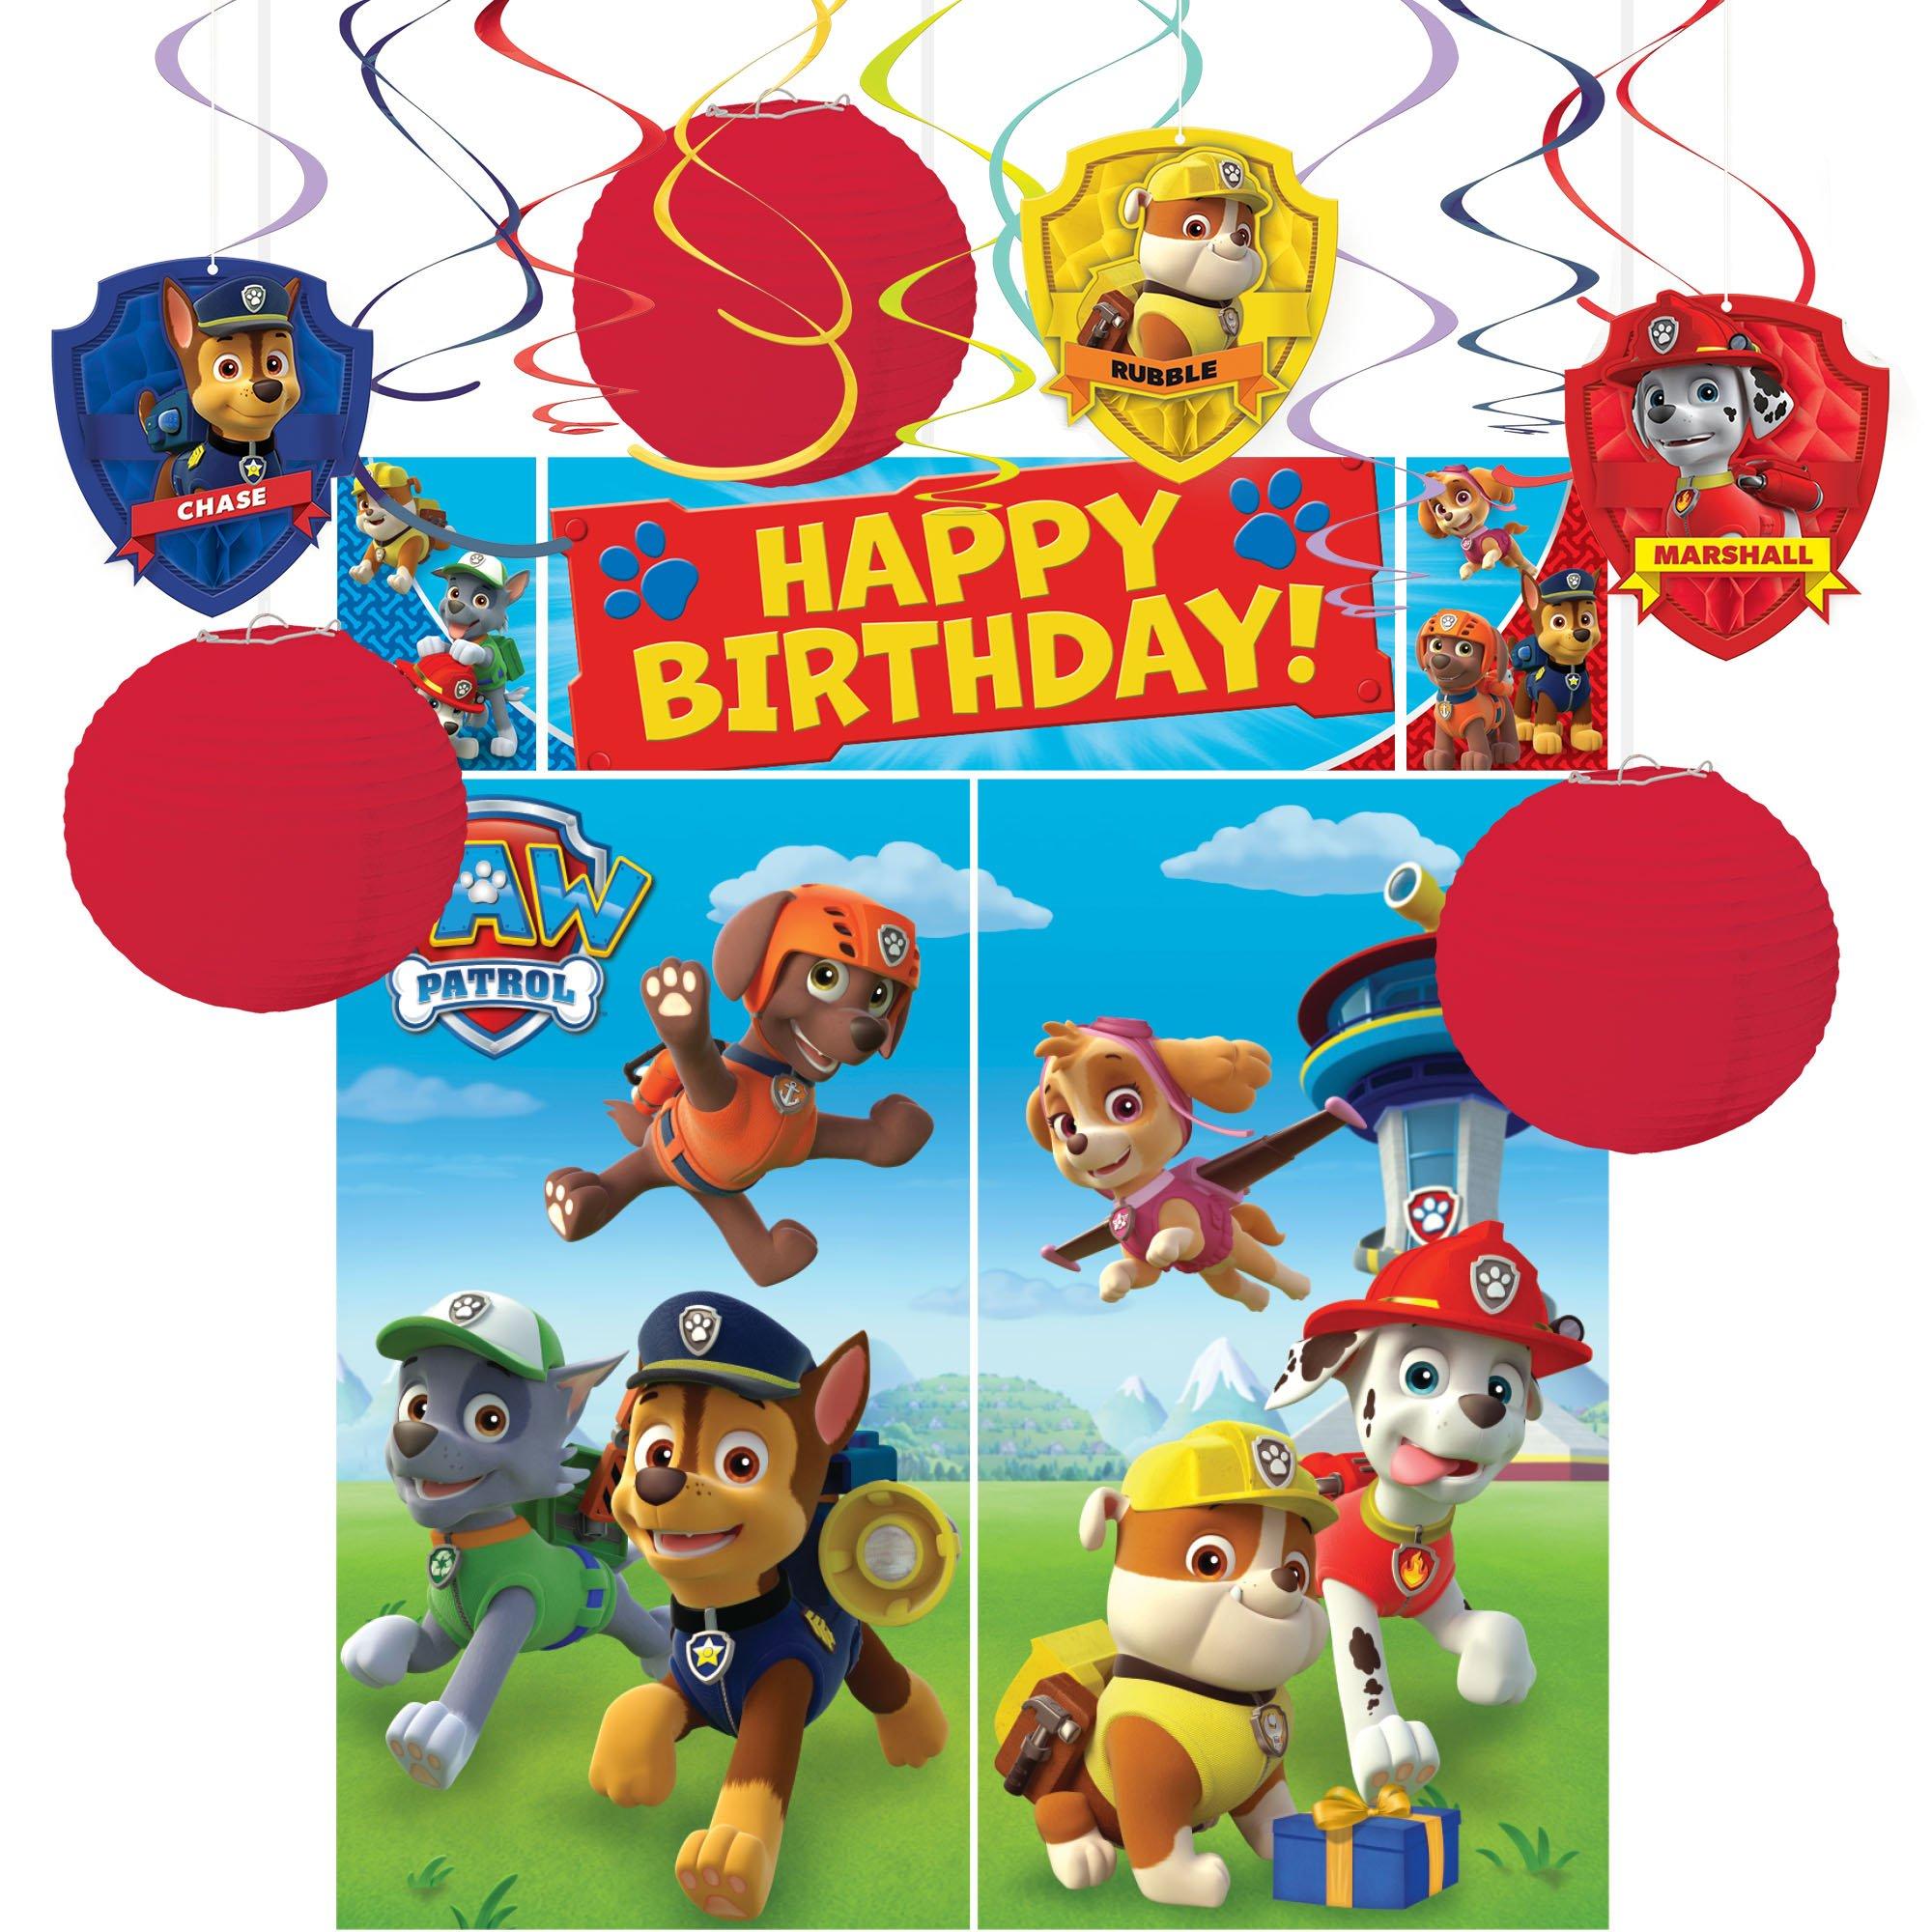 PAW Patrol Party Decorating Supplies Pack - Kit Includes Honeycomb Balls, Scene Setter, Photo Booth Props, Paper Lanterns & Swirl Decorations